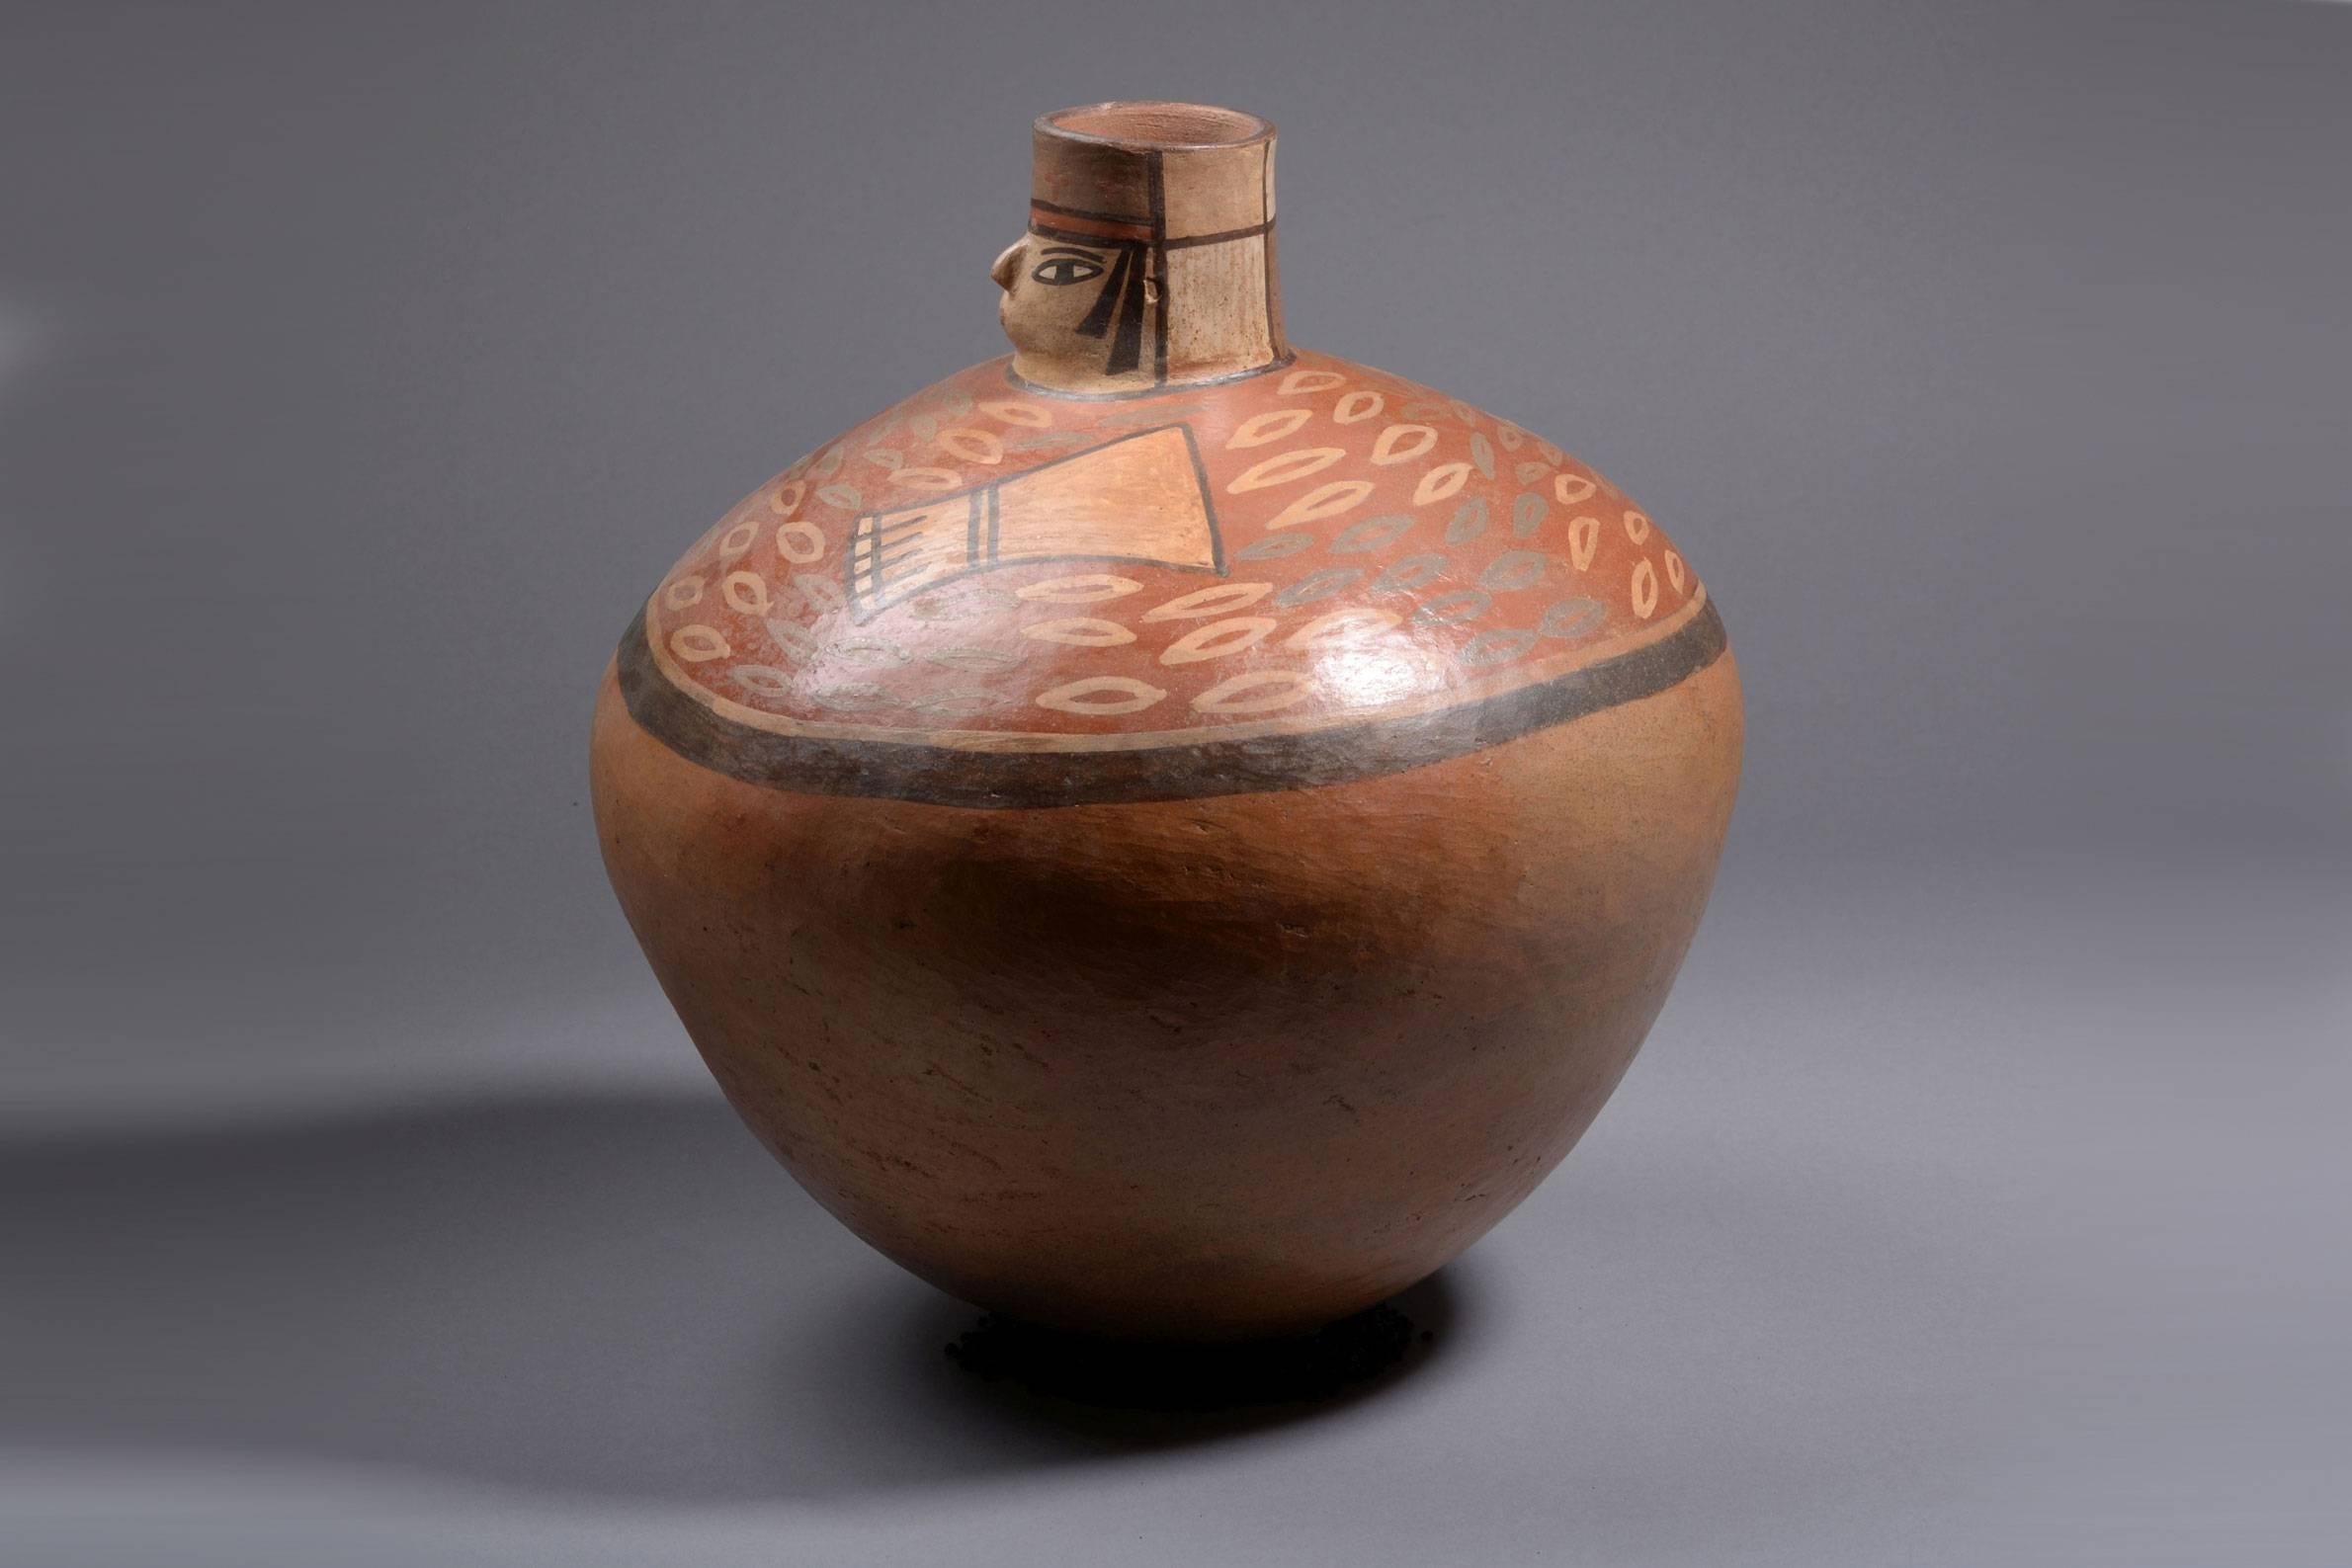 A well provenanced, very large, artistic and vibrant ancient Peruvian Earthenware jug from the Nazca culture, dating to approximately 250 - 540 A.D.

The large ovoid vessel in the form of a rotund hunter. The piece with rounded base, globular body